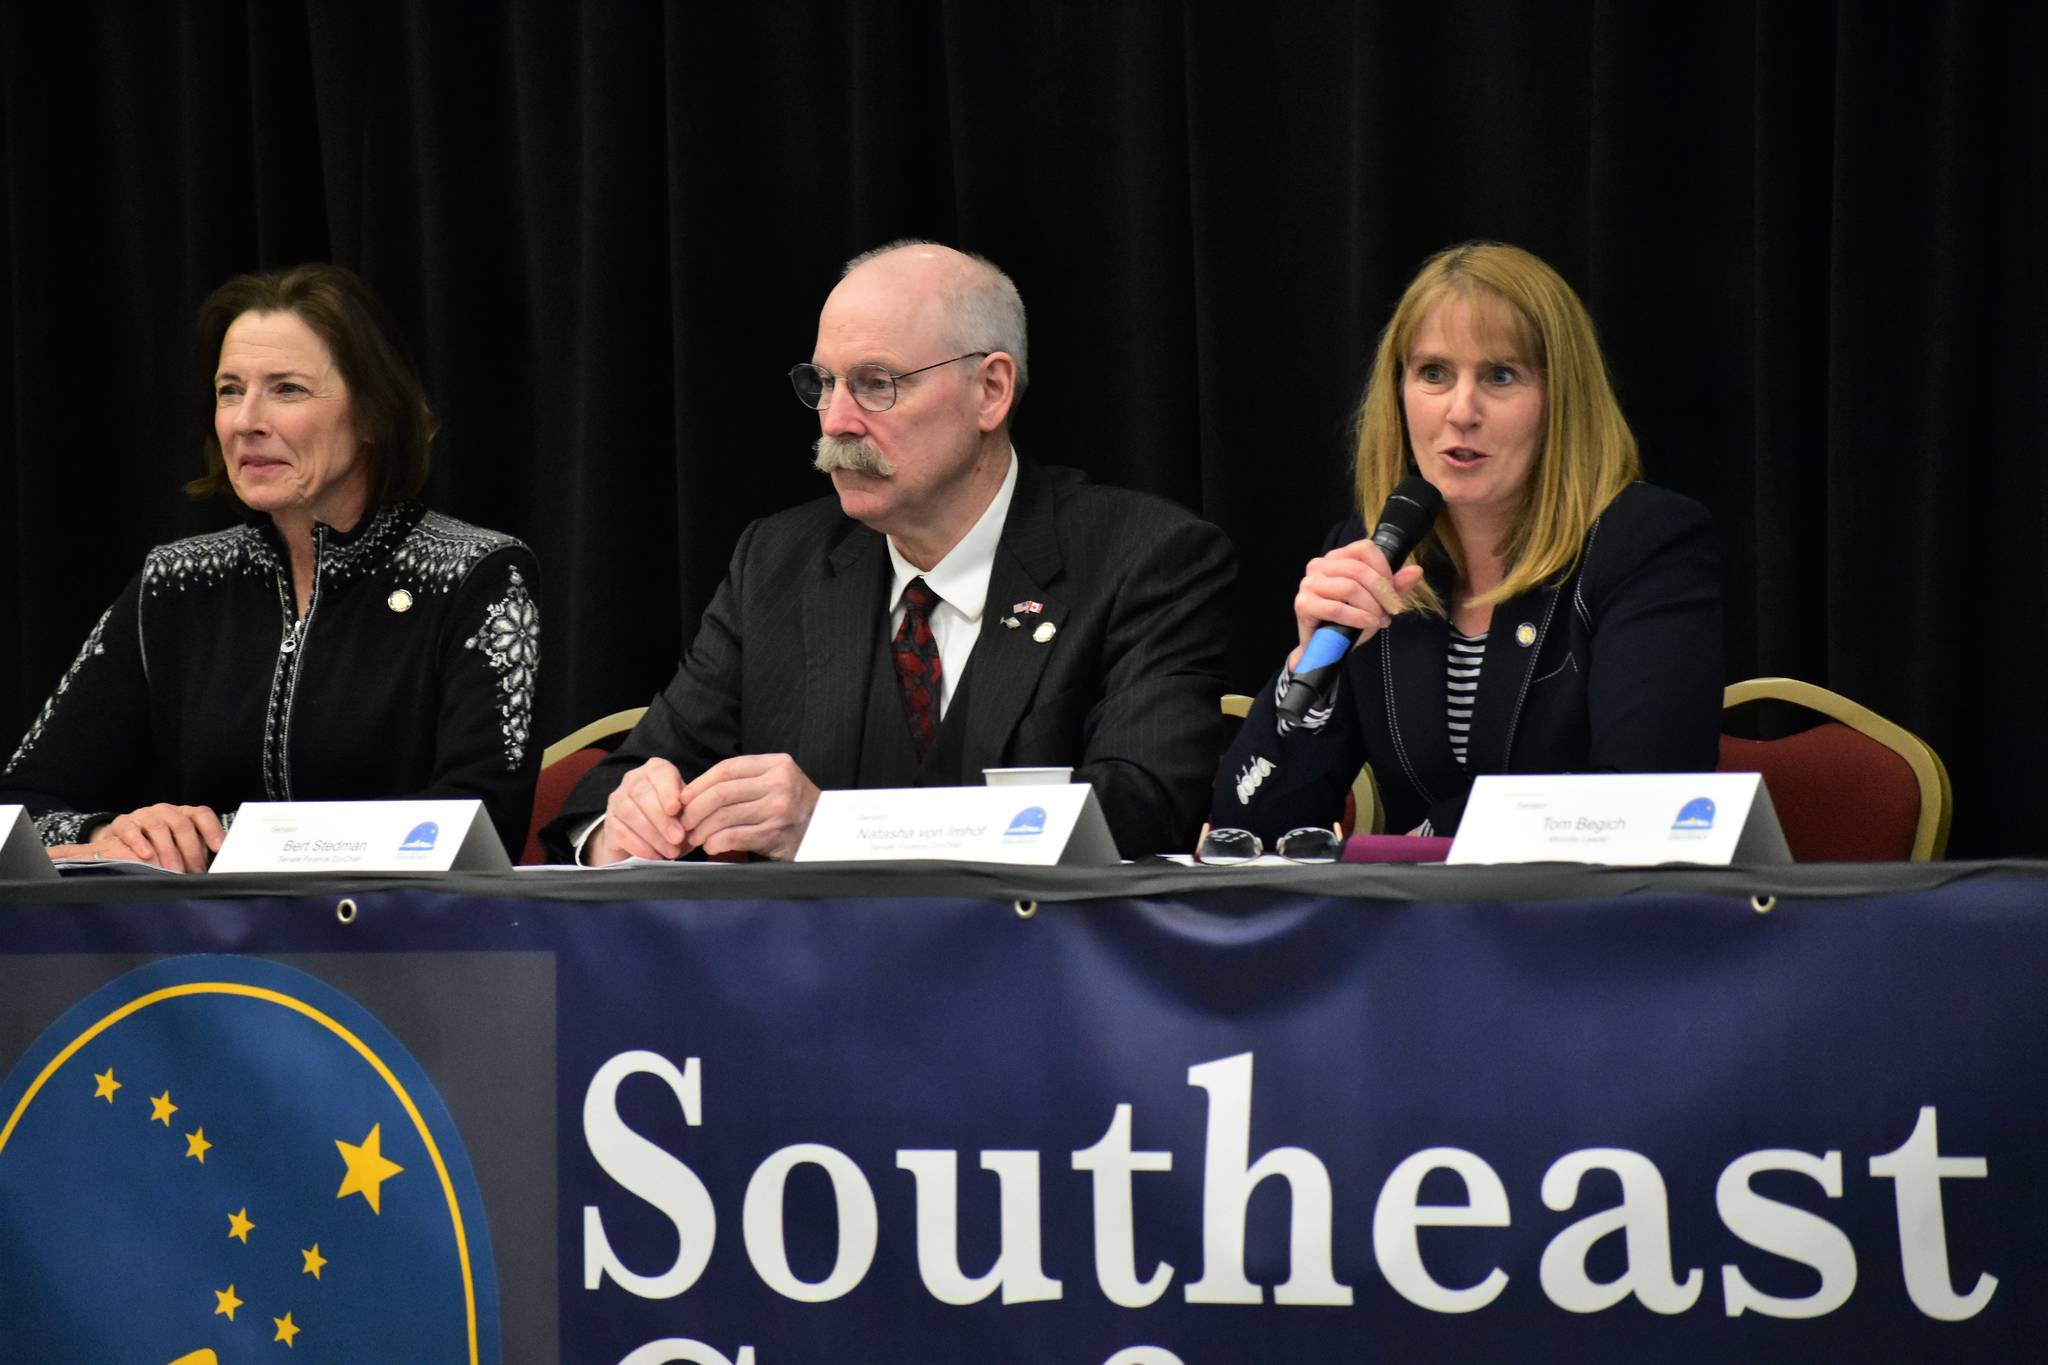 From left, Senate President Cathy Giessel, R-Anchorage, Sen. Bert Stedman, R-Sitka and Sen. Natasha Von Imhof, R-Anchorage, speak at the Southeast Conference mid-session summit at Elizabeth Peratovich Hall on Tuesday. (Peter Segall |Juneau Empire)